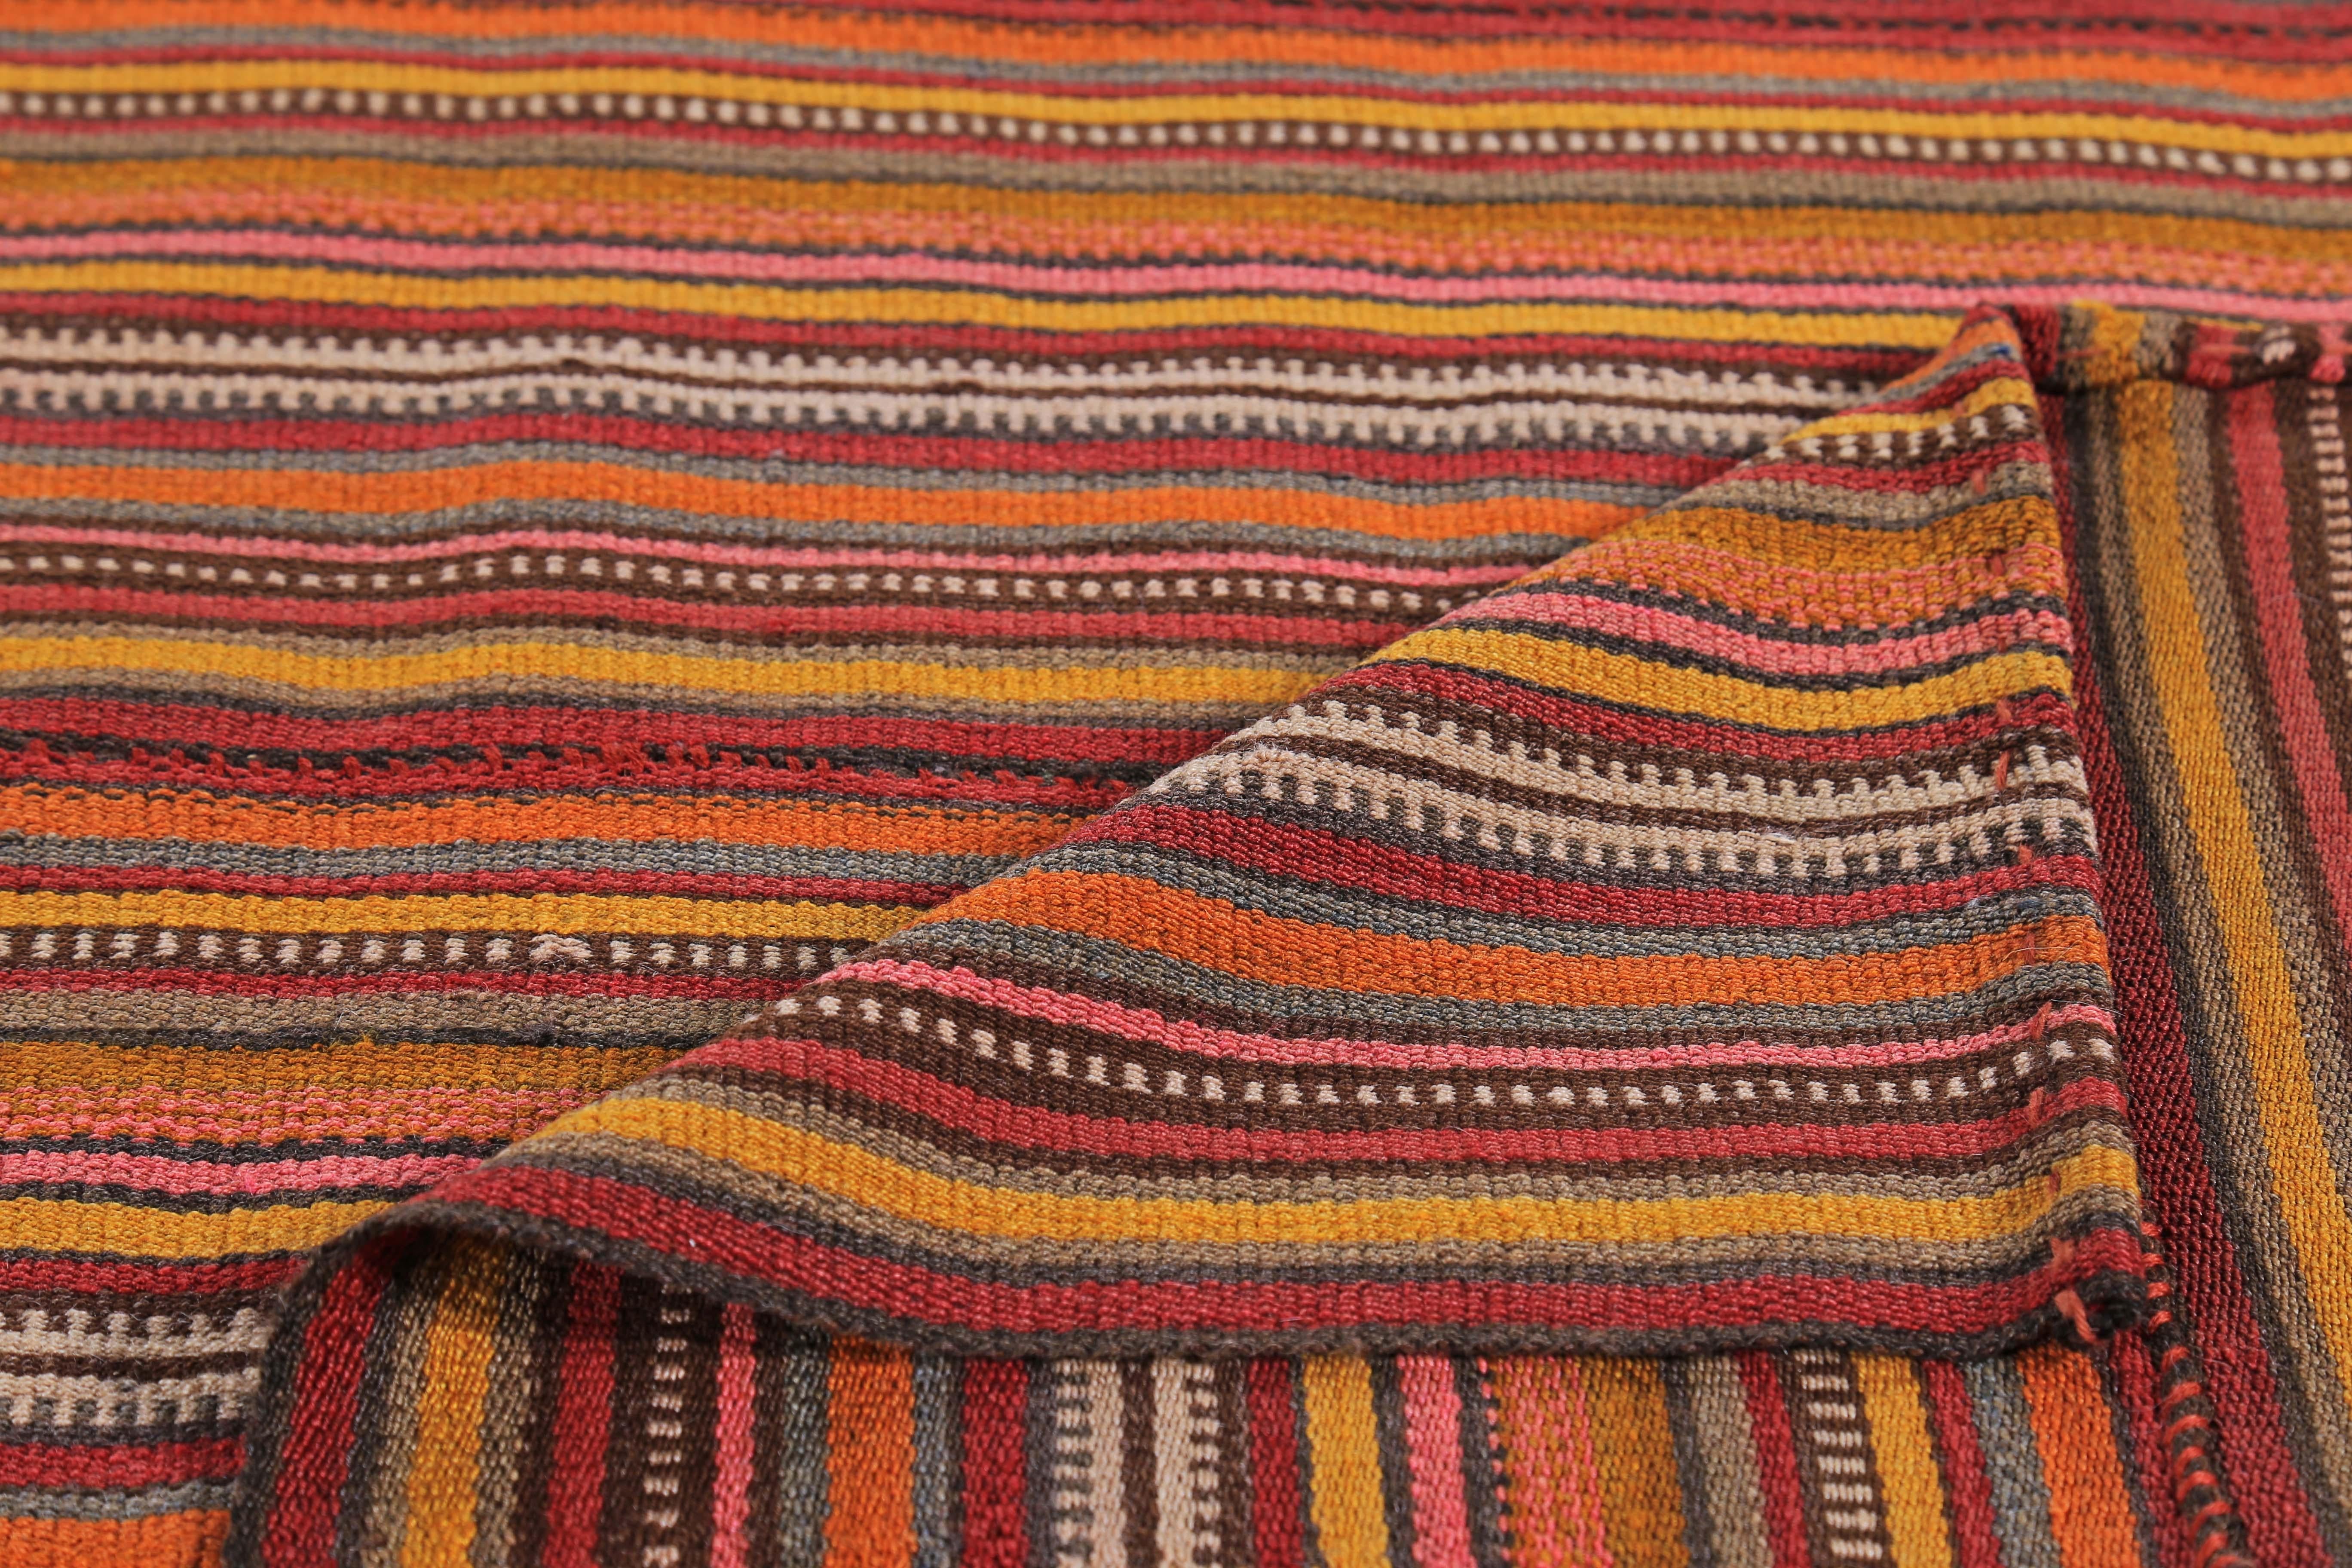 Modern Turkish Kilim Rug with Orange, Red and Beige Pencil Stripes In New Condition For Sale In Dallas, TX